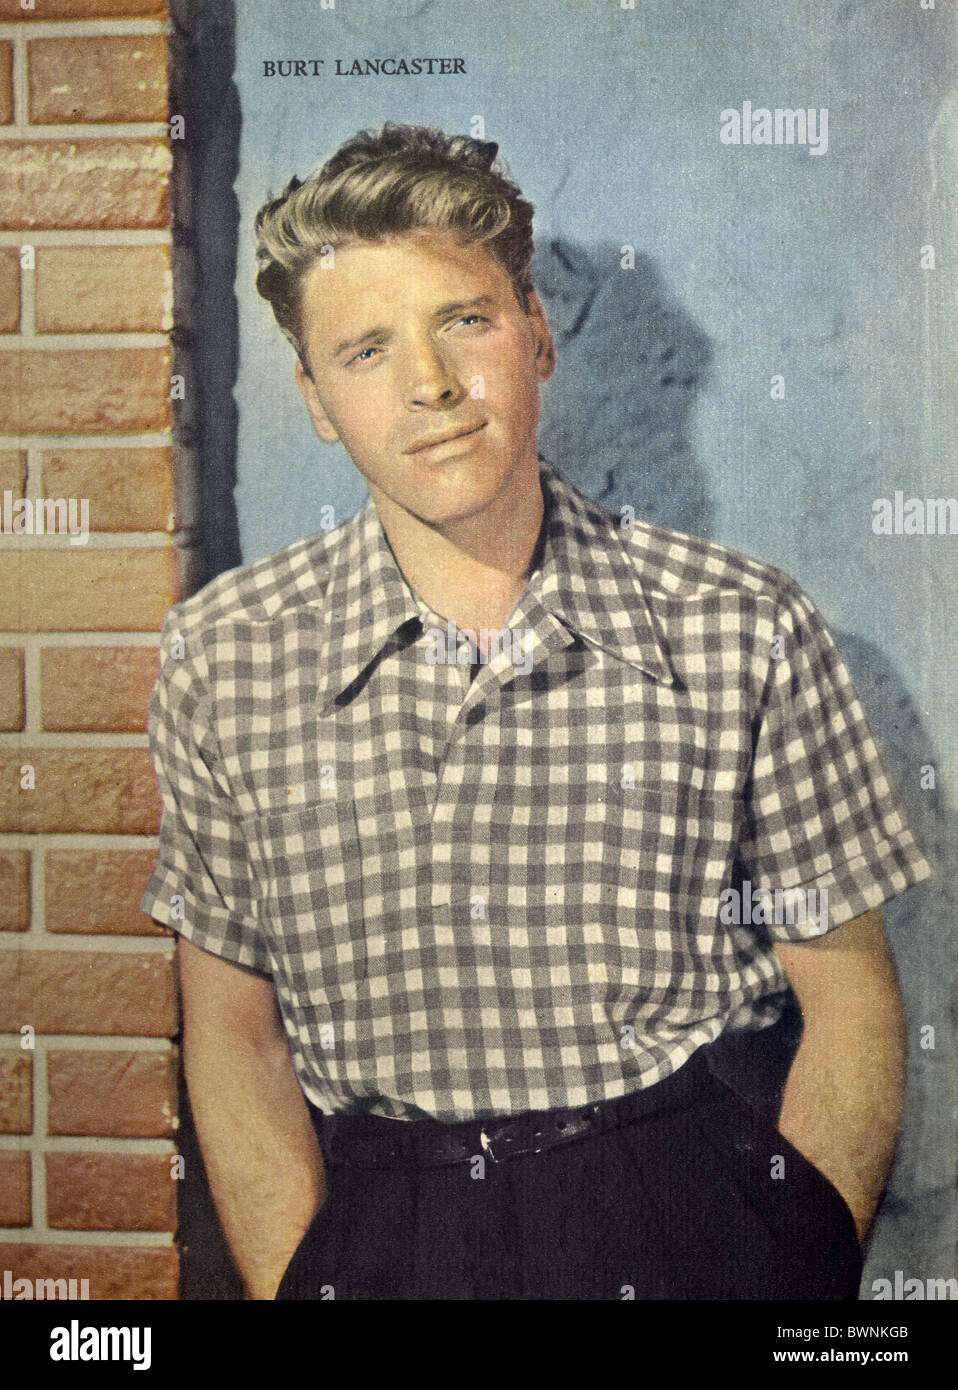 A vintage Hollywood publicity still of Burt Lancaster in the early 1950s from a film fan magazine. Stock Photo